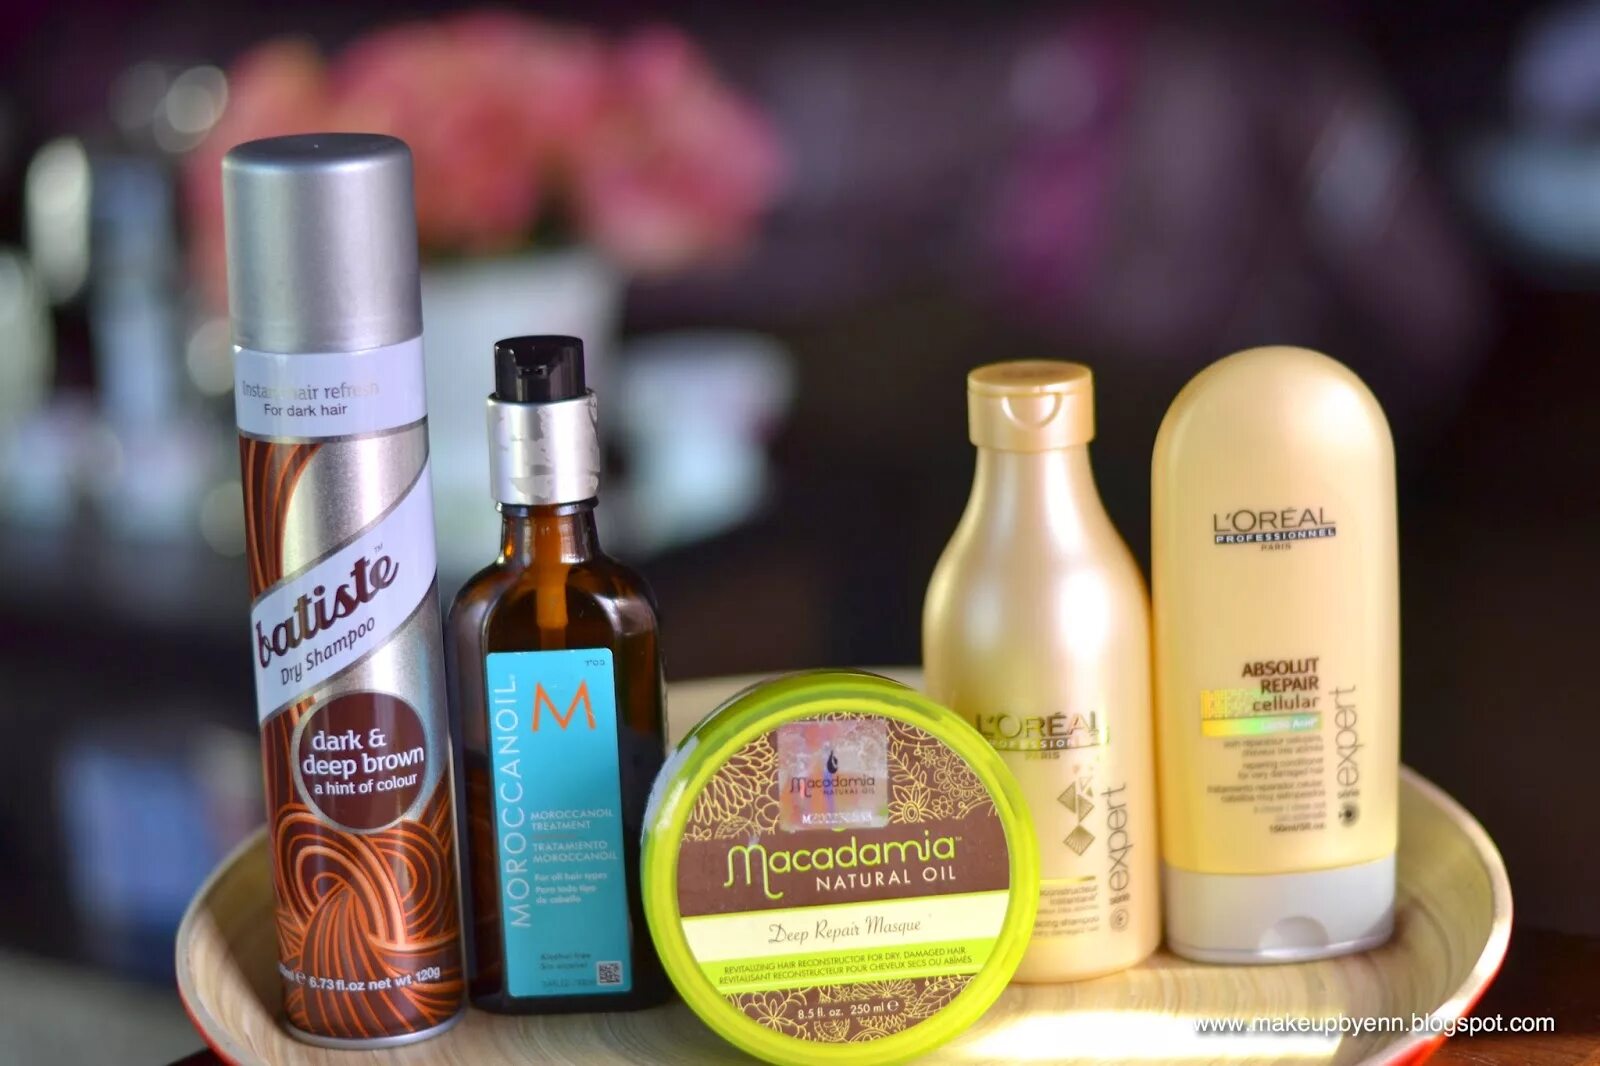 Hair products. Hair Care products Beauty. Hair Care штащкфашс. Ref hair Care. Hair Care products Jar.